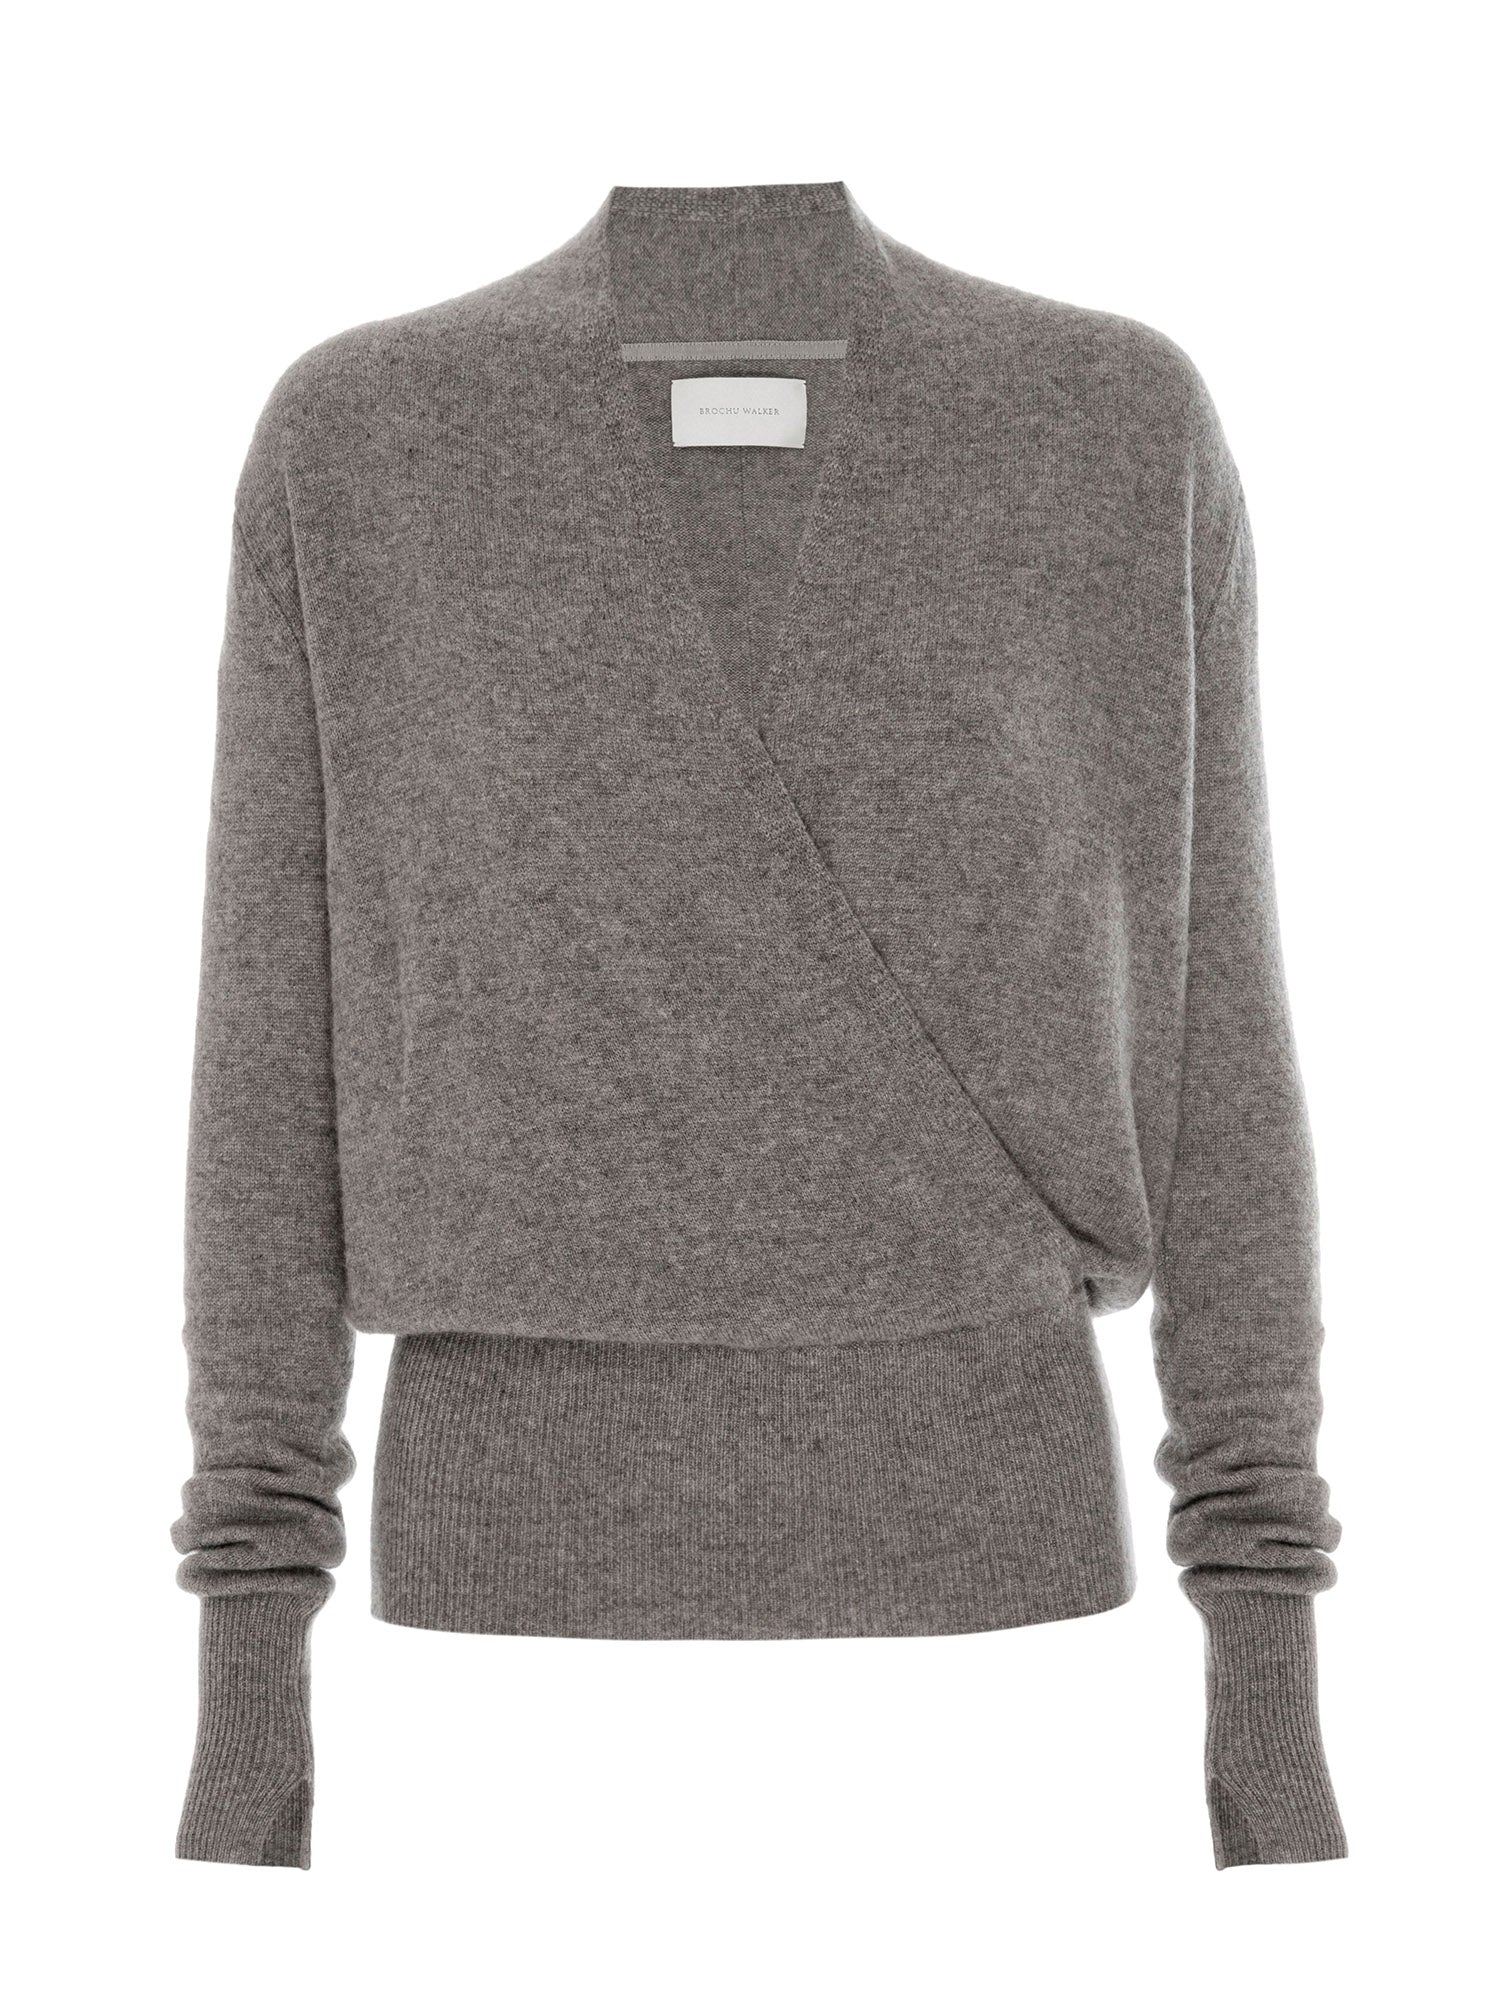 Phinneas cashmere v-neck blue grey sweater flat view